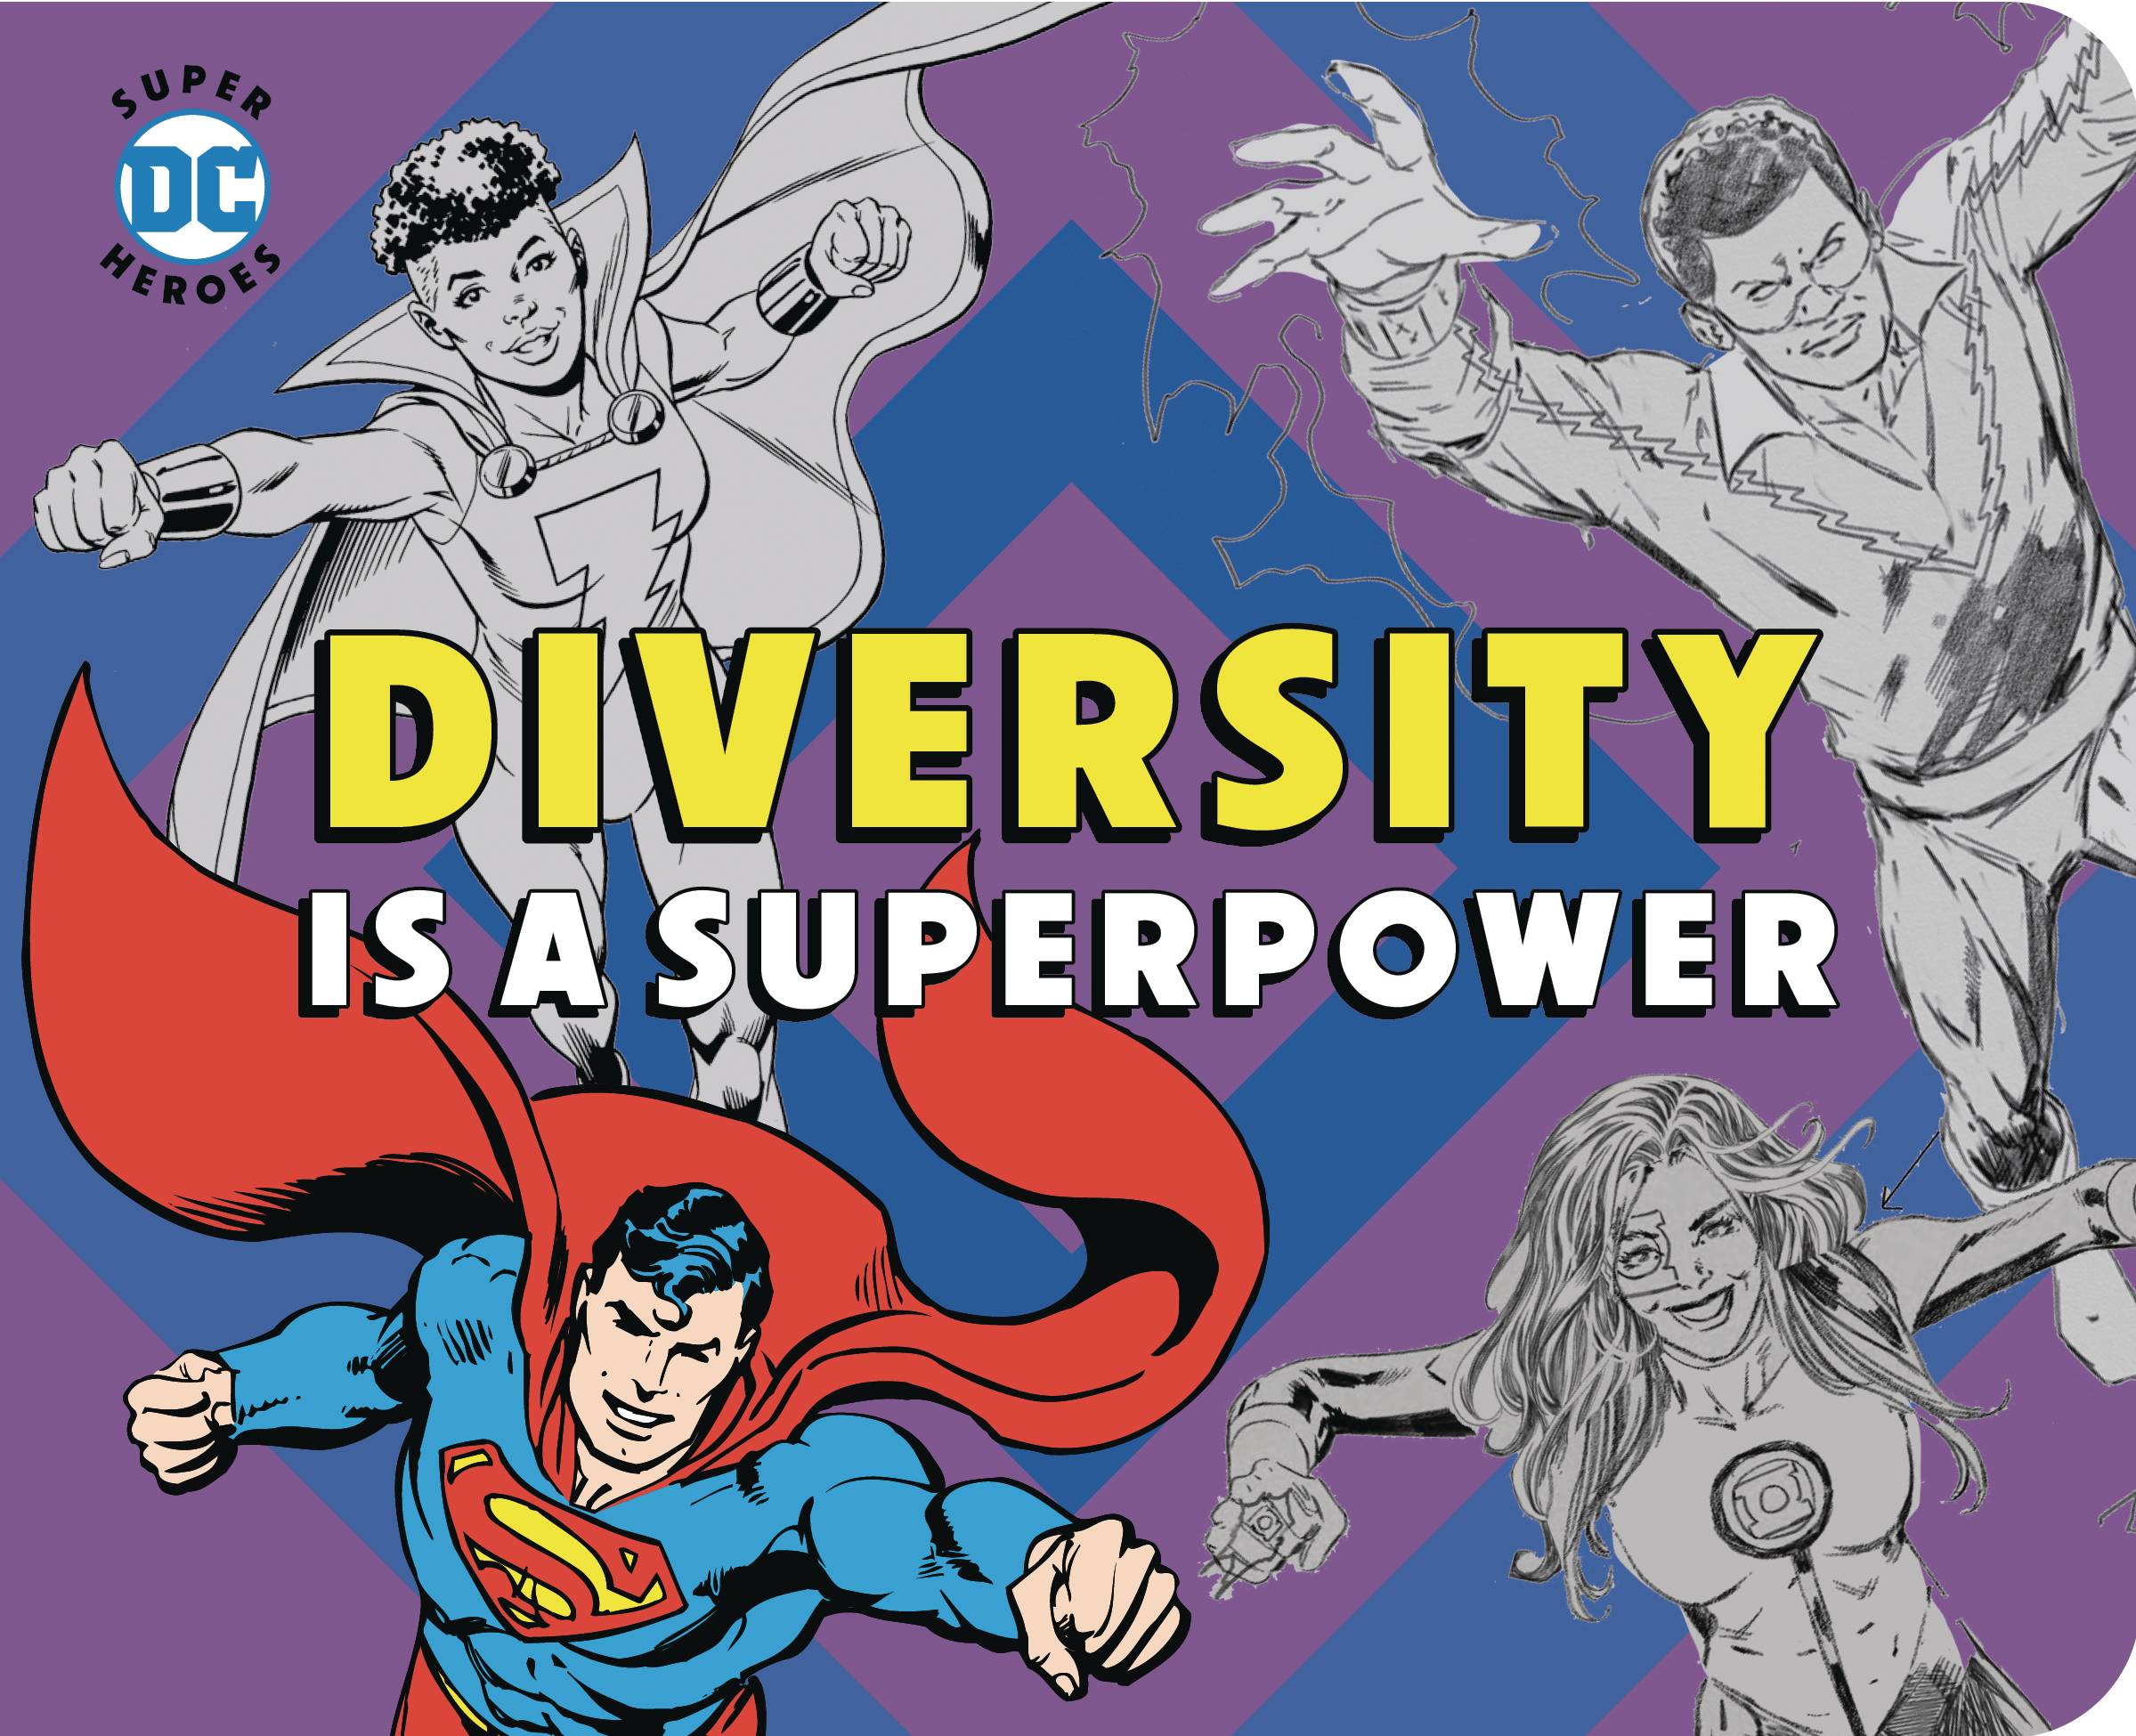 (USE MAR239255) DC SUPER HEROES DIVERSITY IS SUPERPOWER BOAR